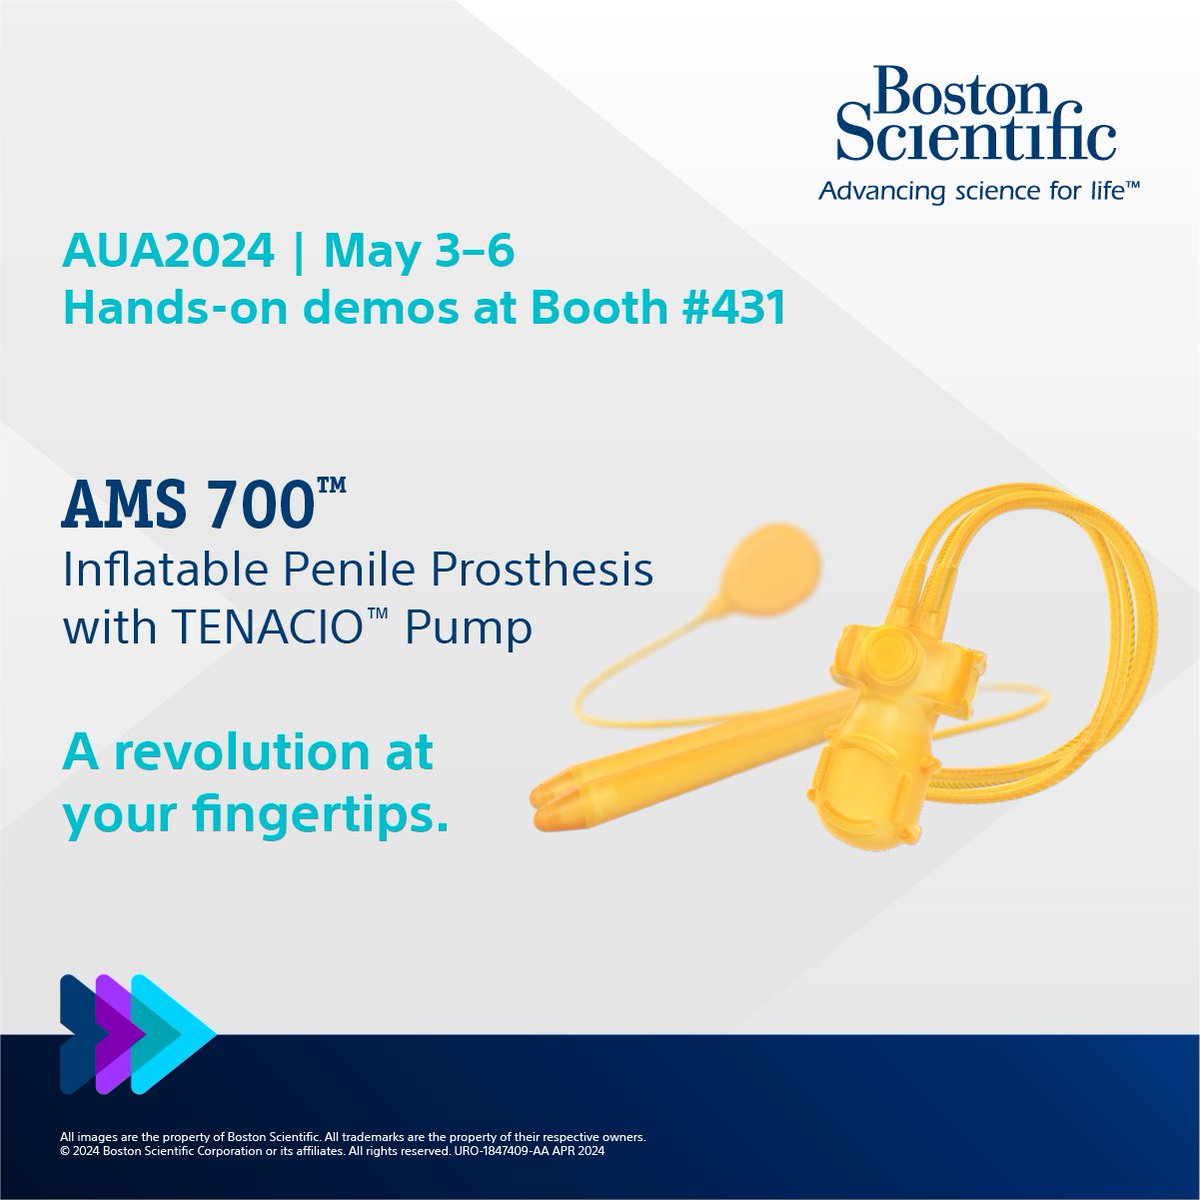 Learn more about the newly FDA-approved TENACIO Pump at #AUA24! Visit Booth 431 for a demo and see the updated design features aimed to streamline the patient experience. bit.ly/3Jkbb2F